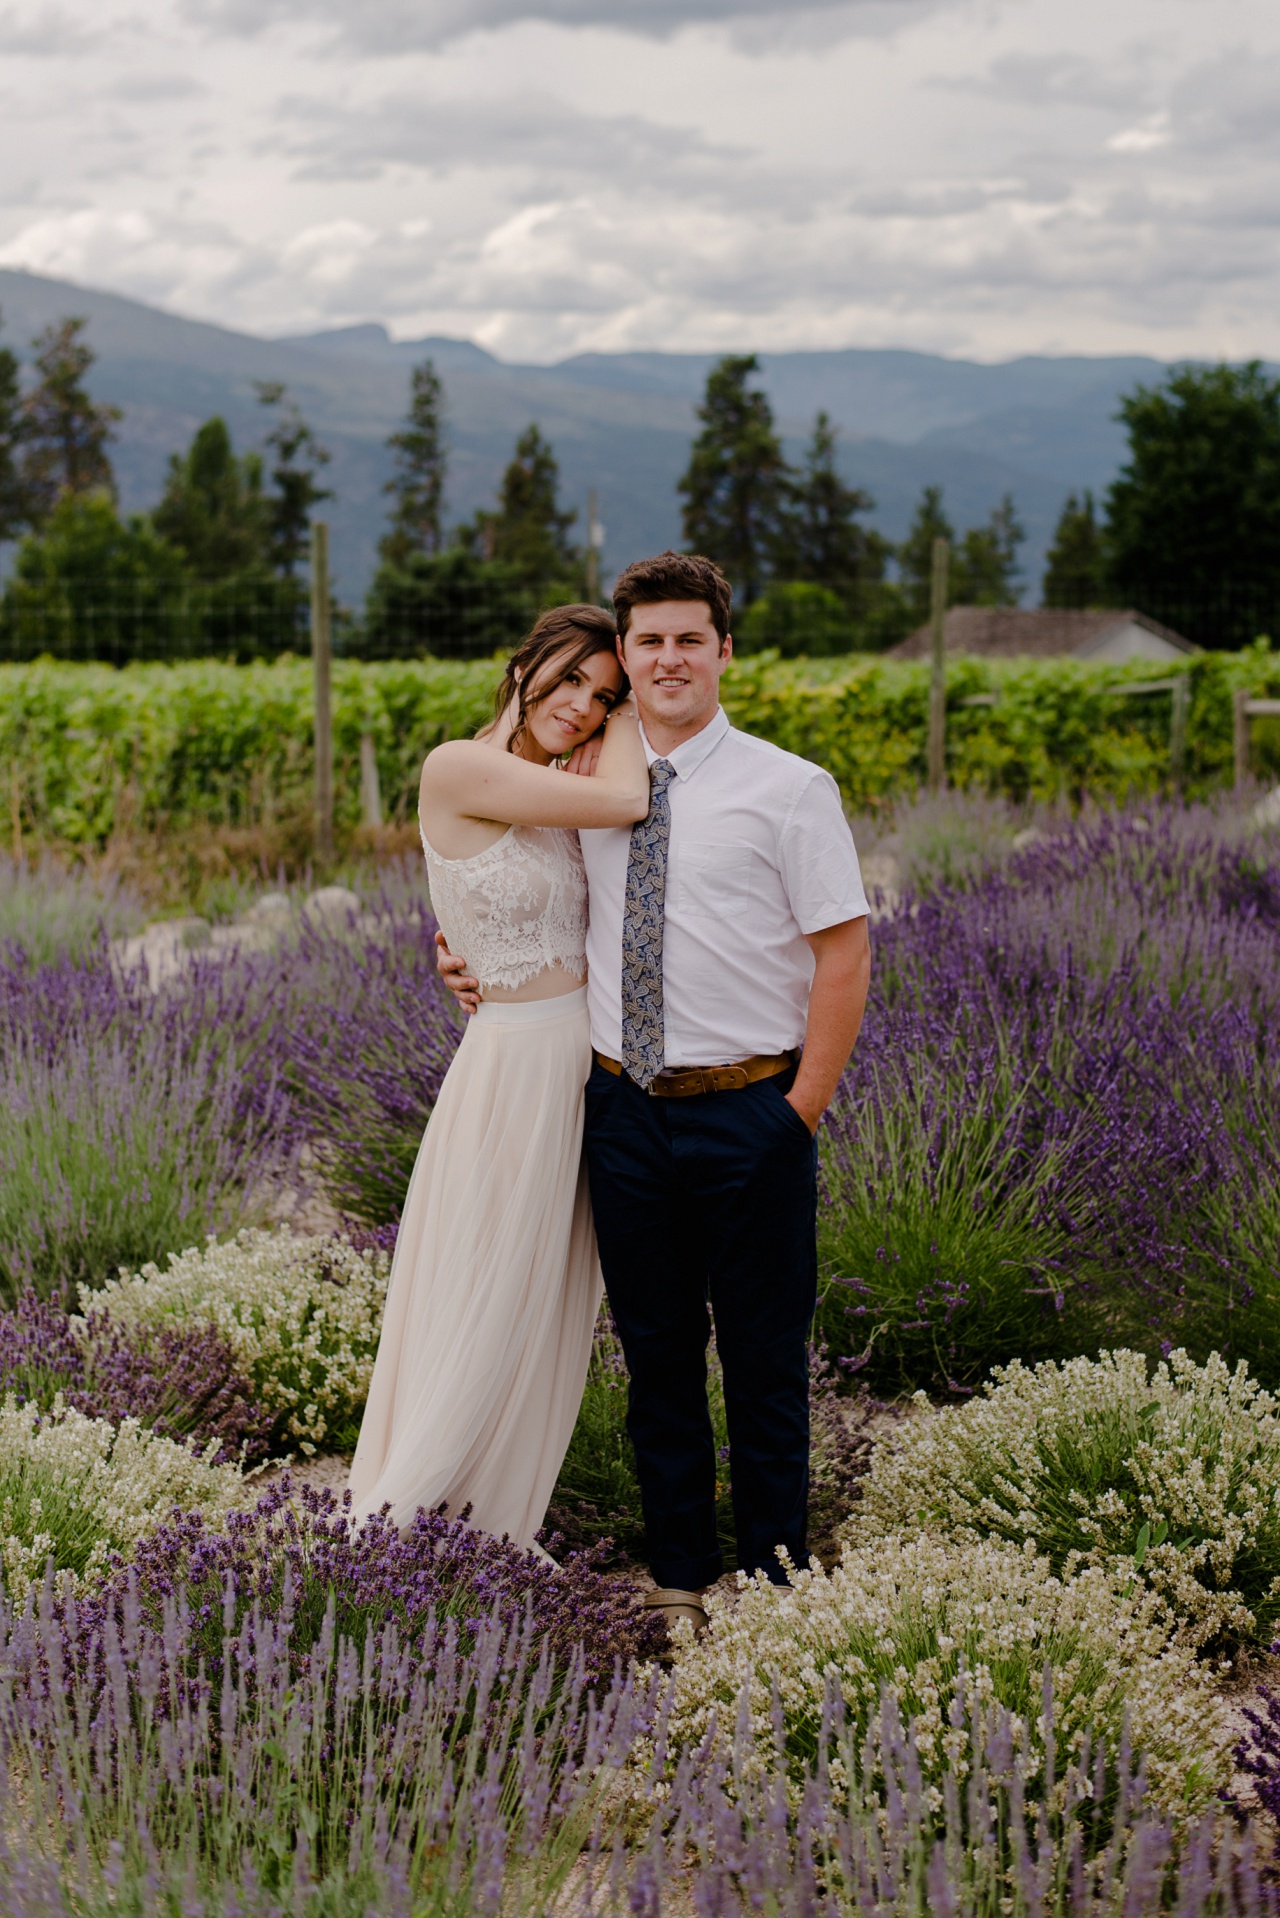 Bride and groom photos in lavender field, Lake Country wedding